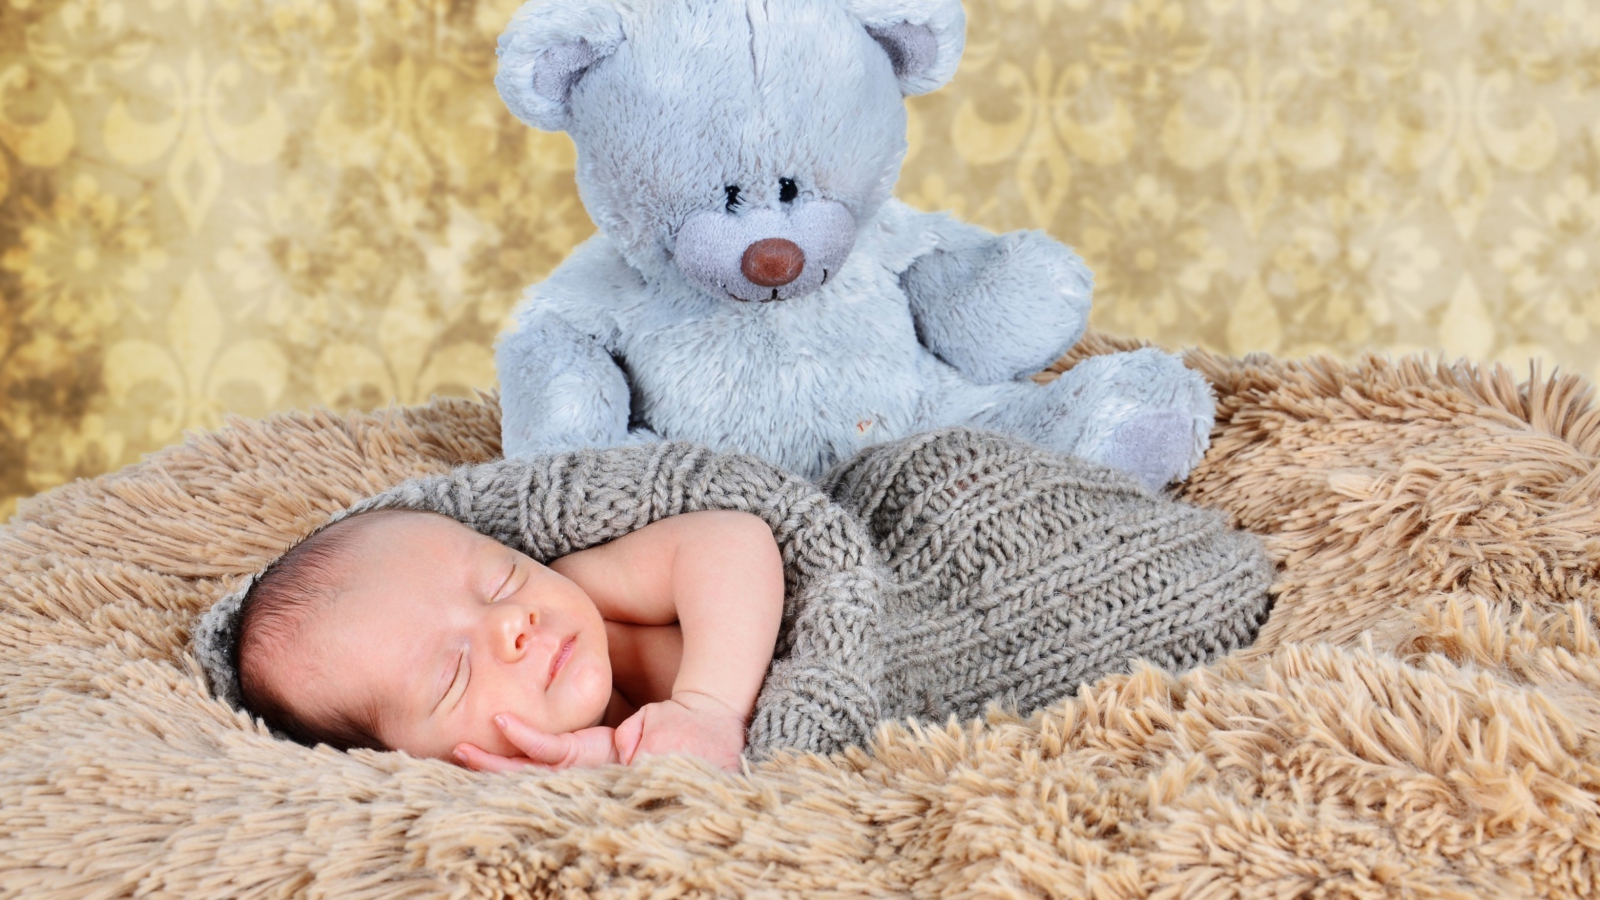 Baby And His Teddy wallpaper 1600x900